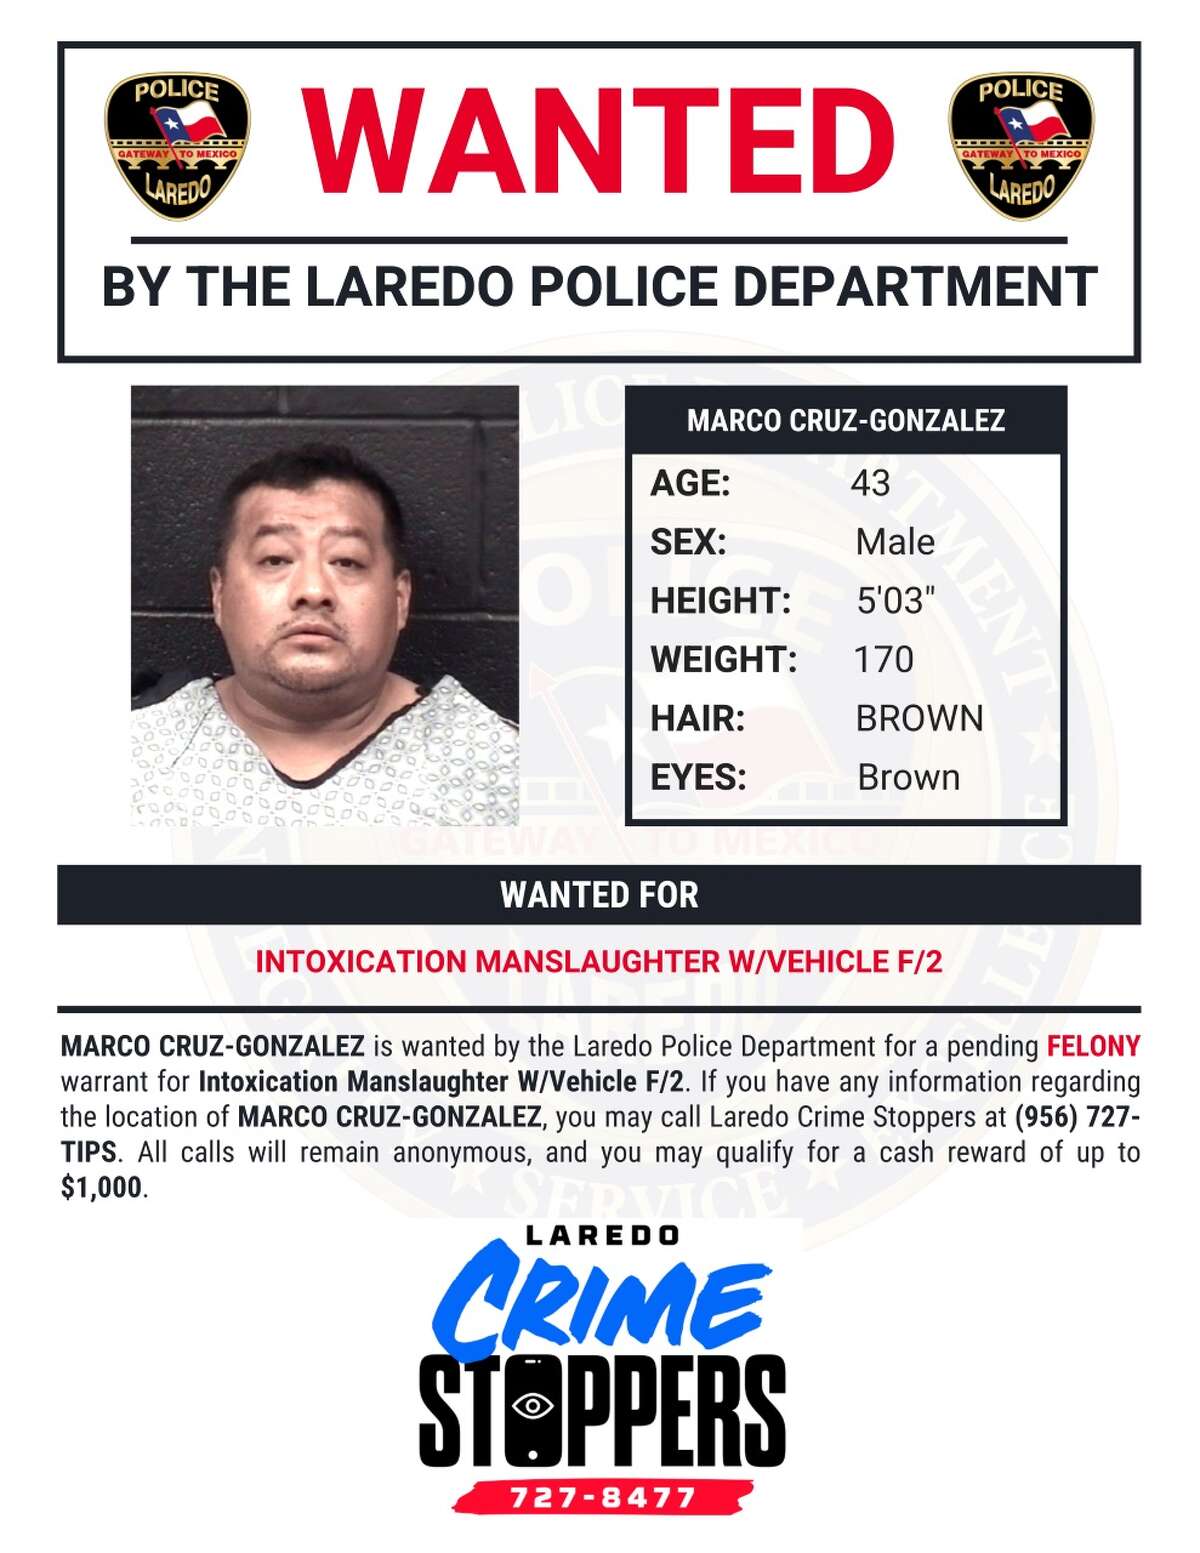 This is the wanted poster for Marco Cruz-Gonzalez. He has an active warrant for his arrest for intoxication manslaughter.